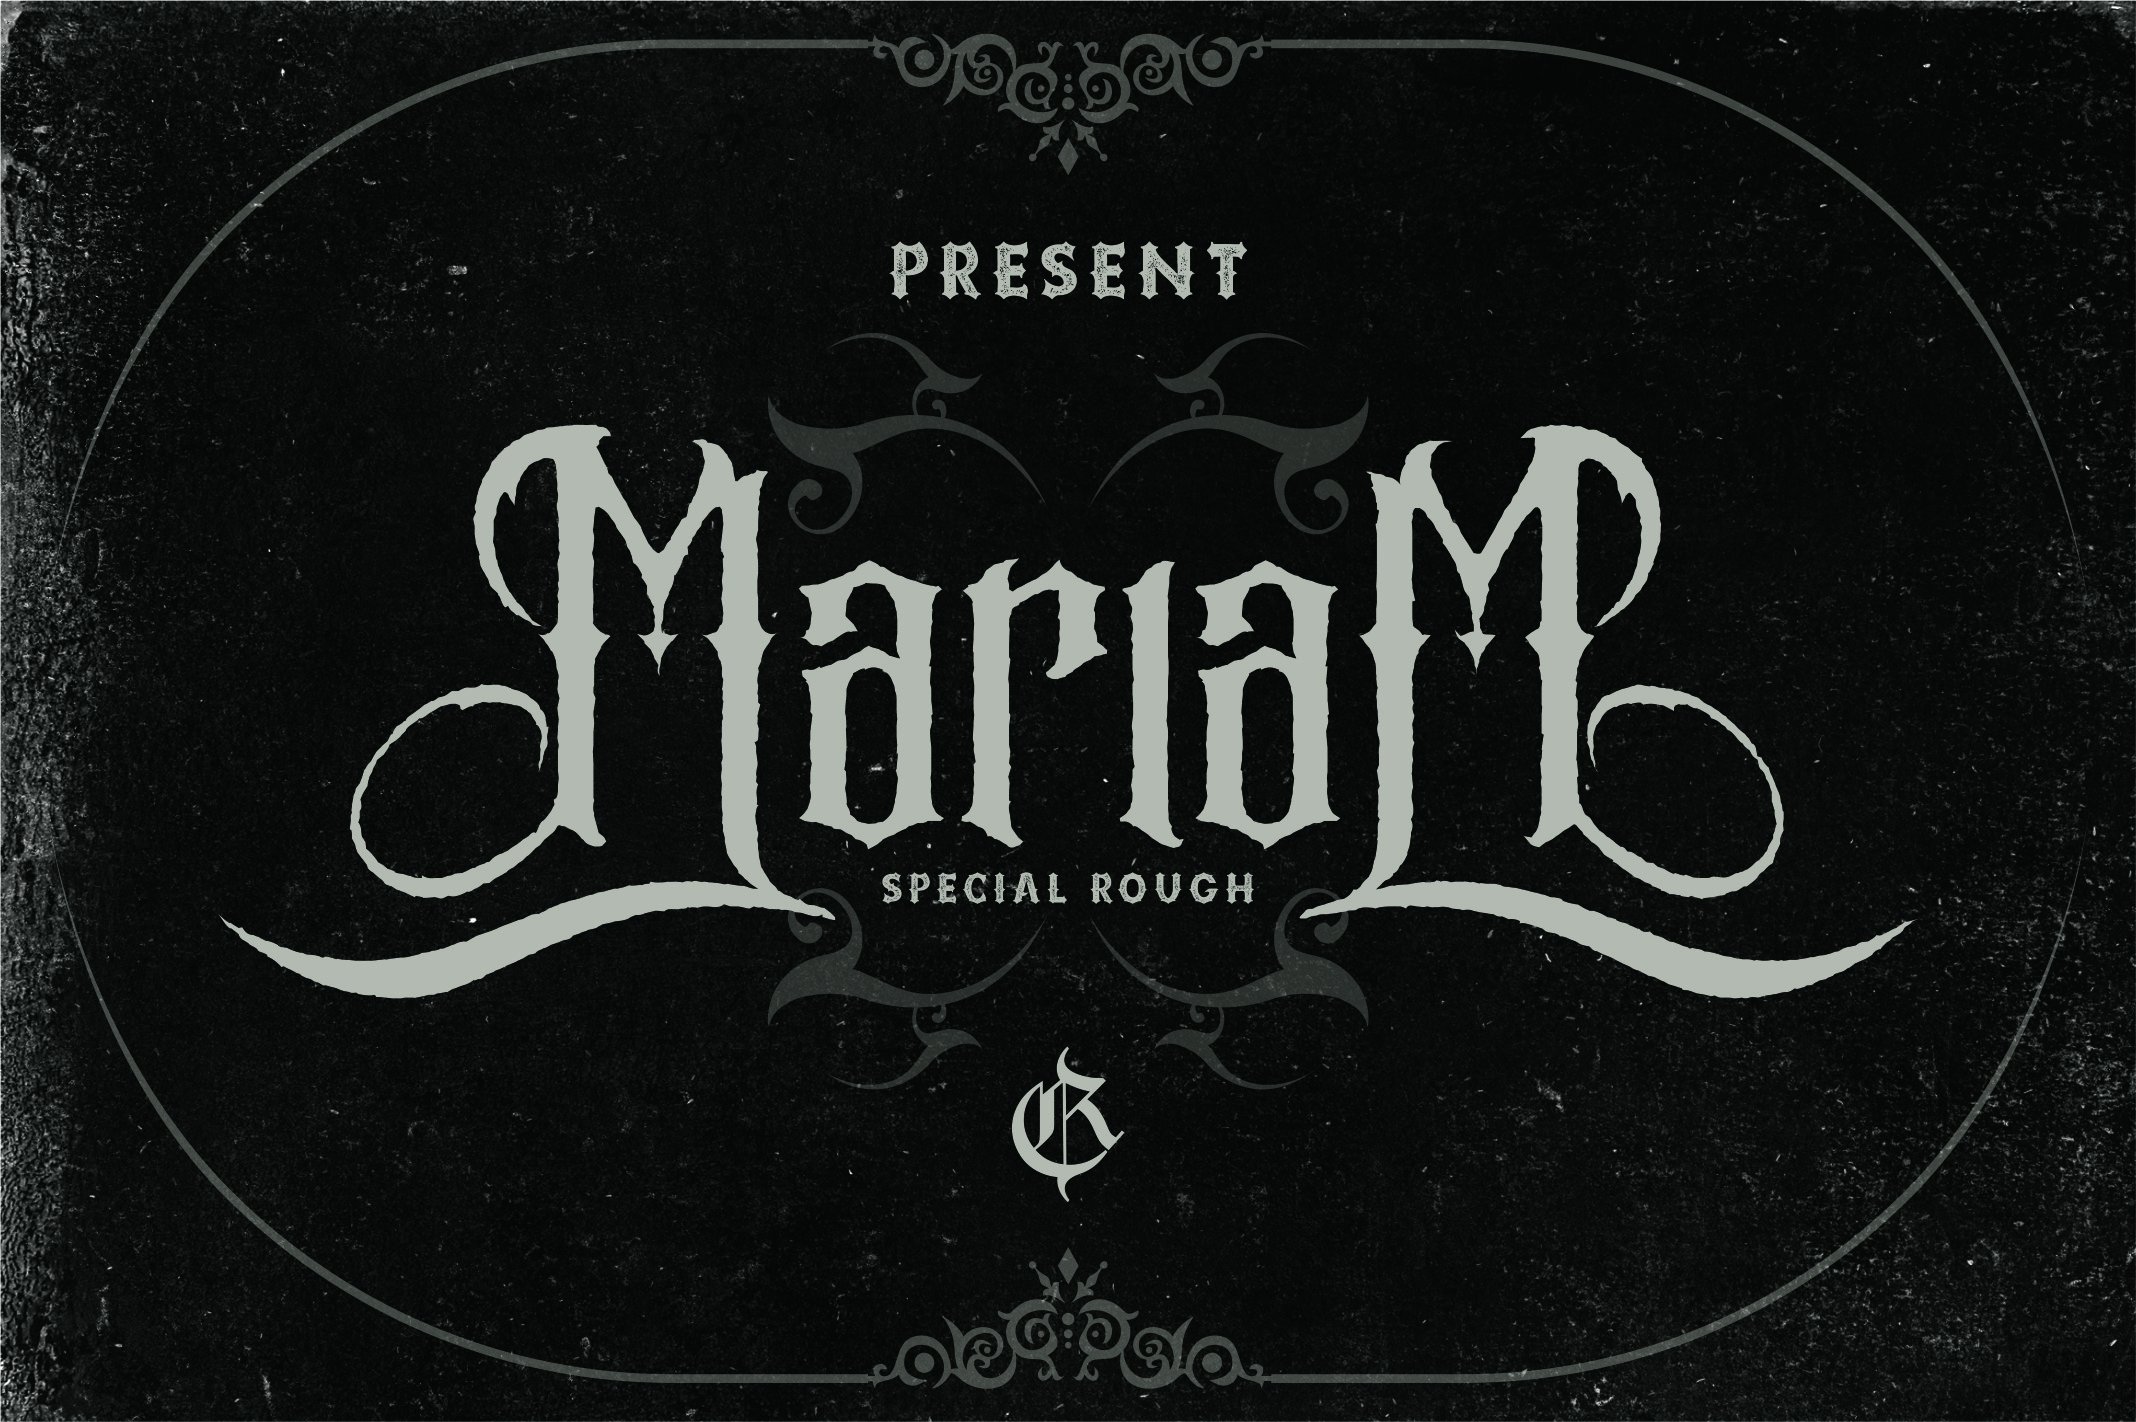 The Mariam story (update) cover image.